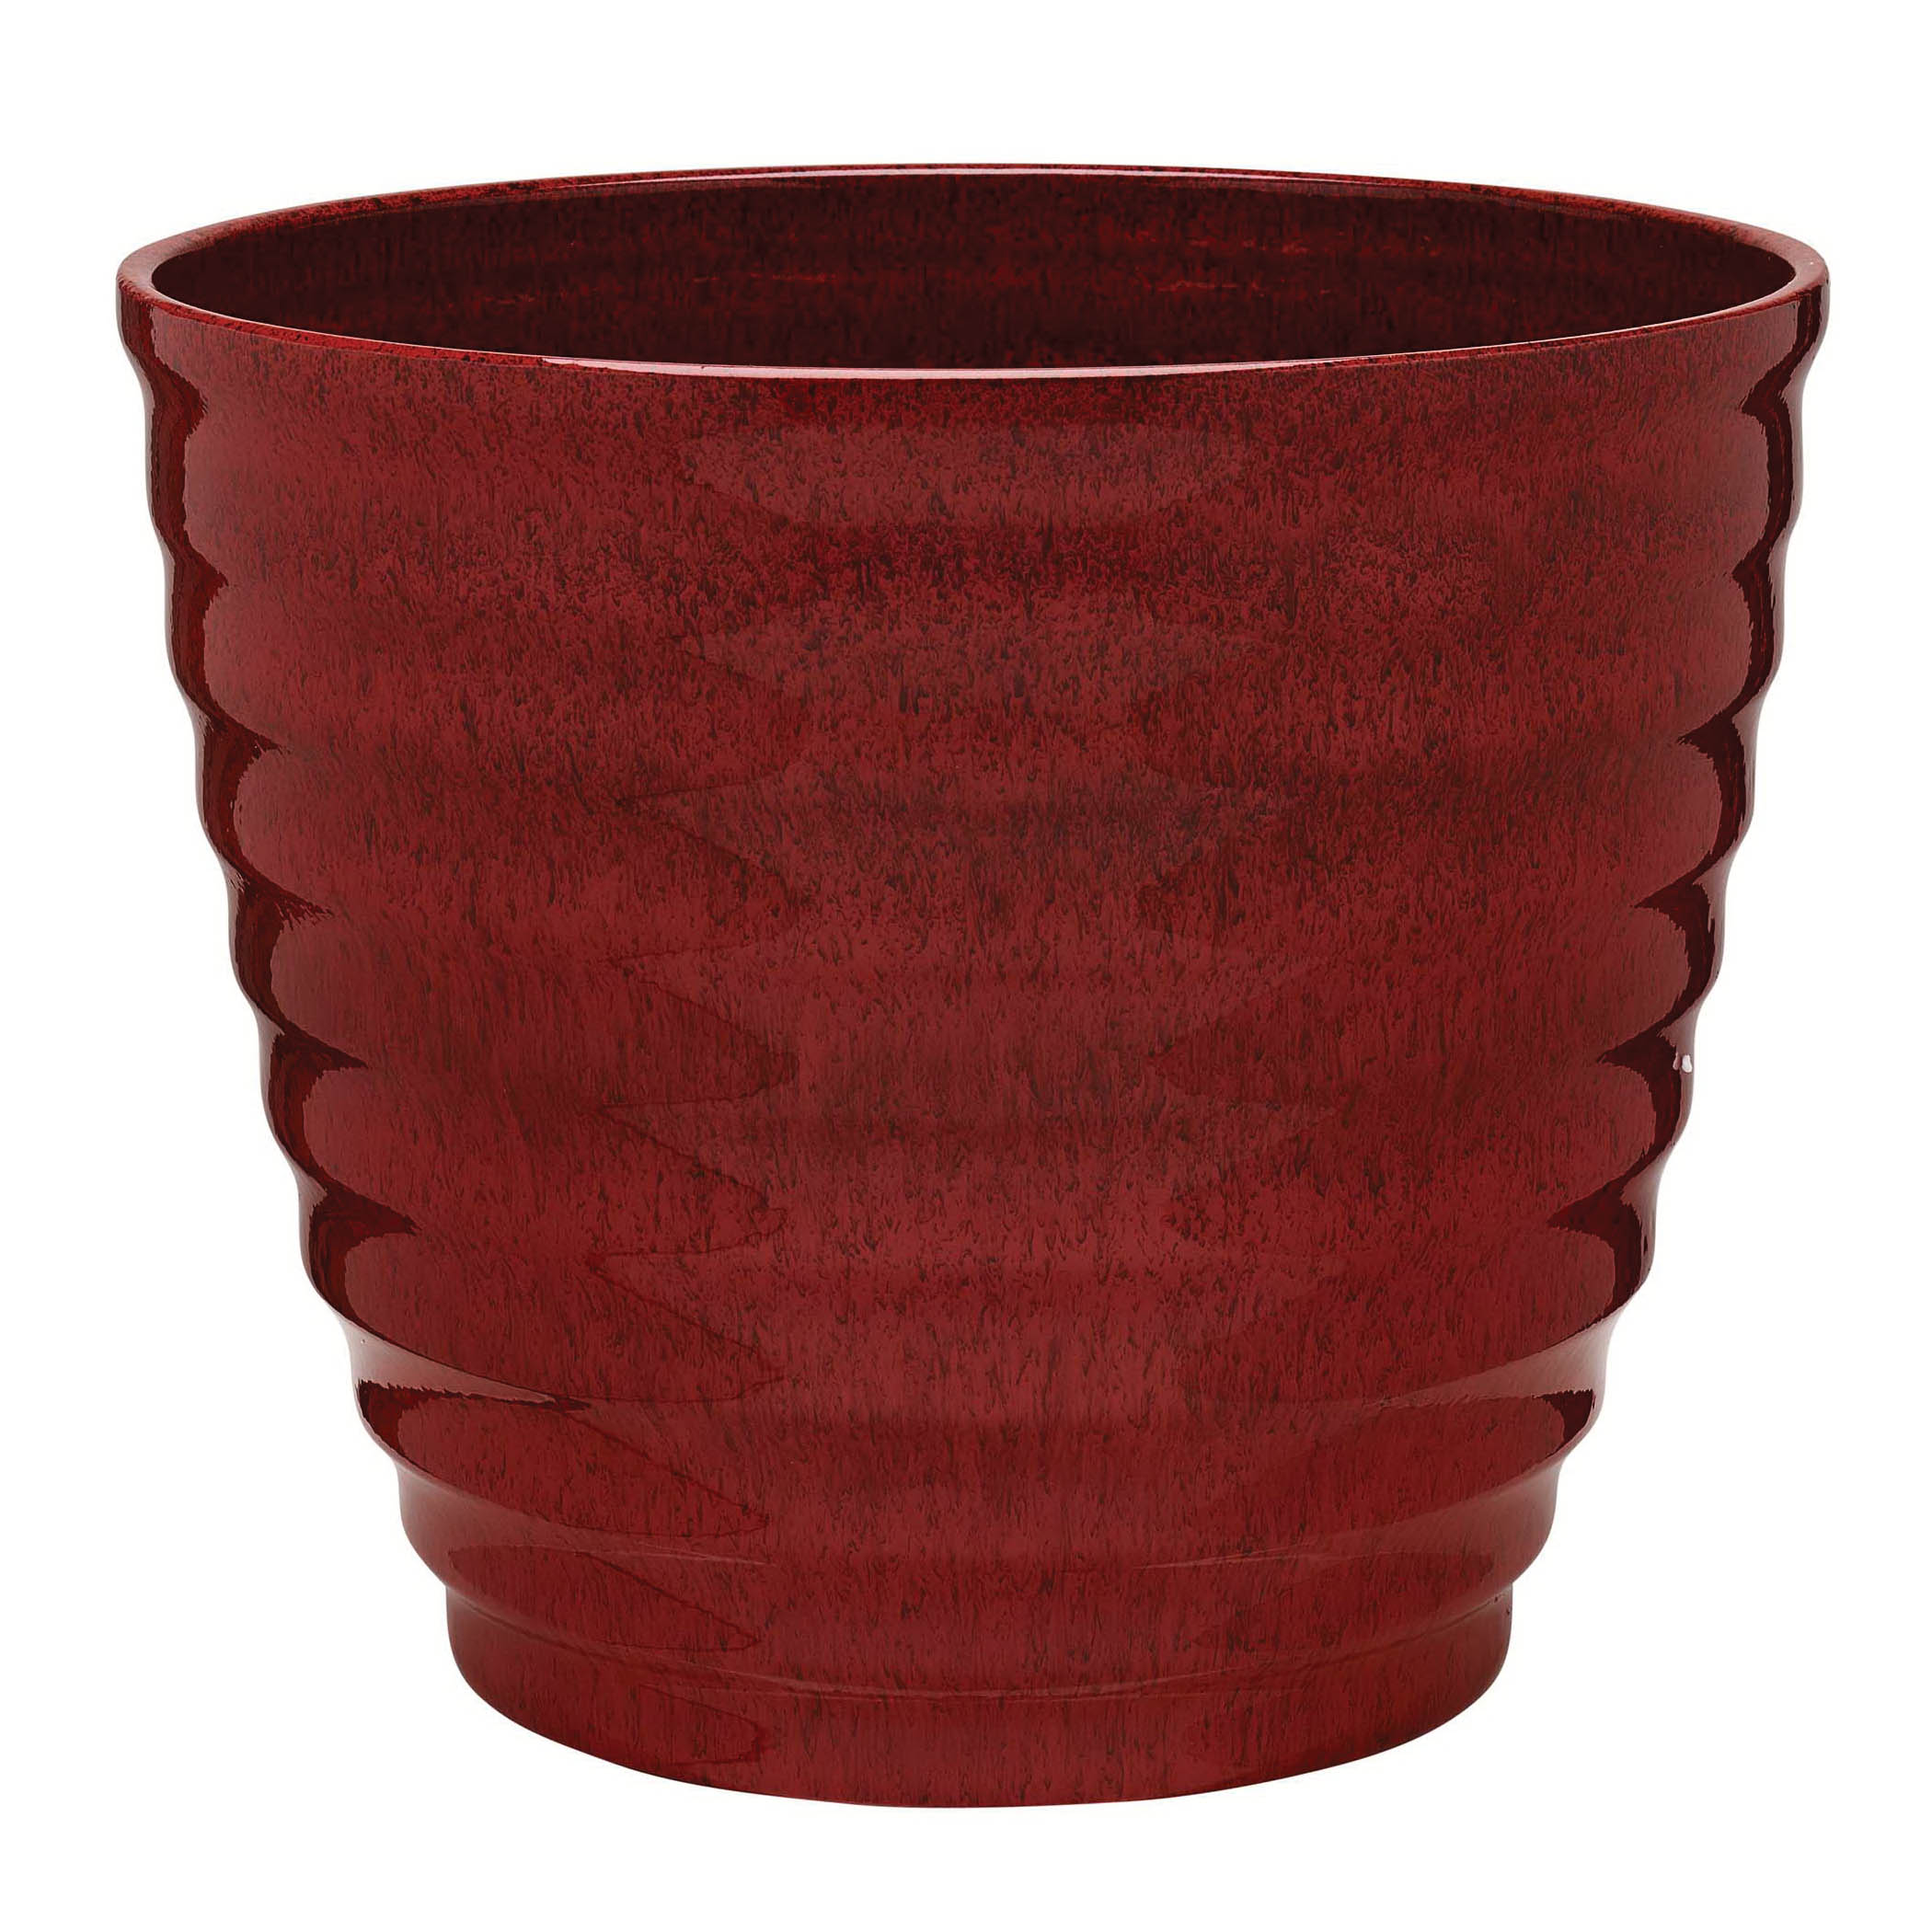 HDR-064749 Planter, 14 in Dia, 11-1/2 in H, Round, Beehive Design, Resin, Red